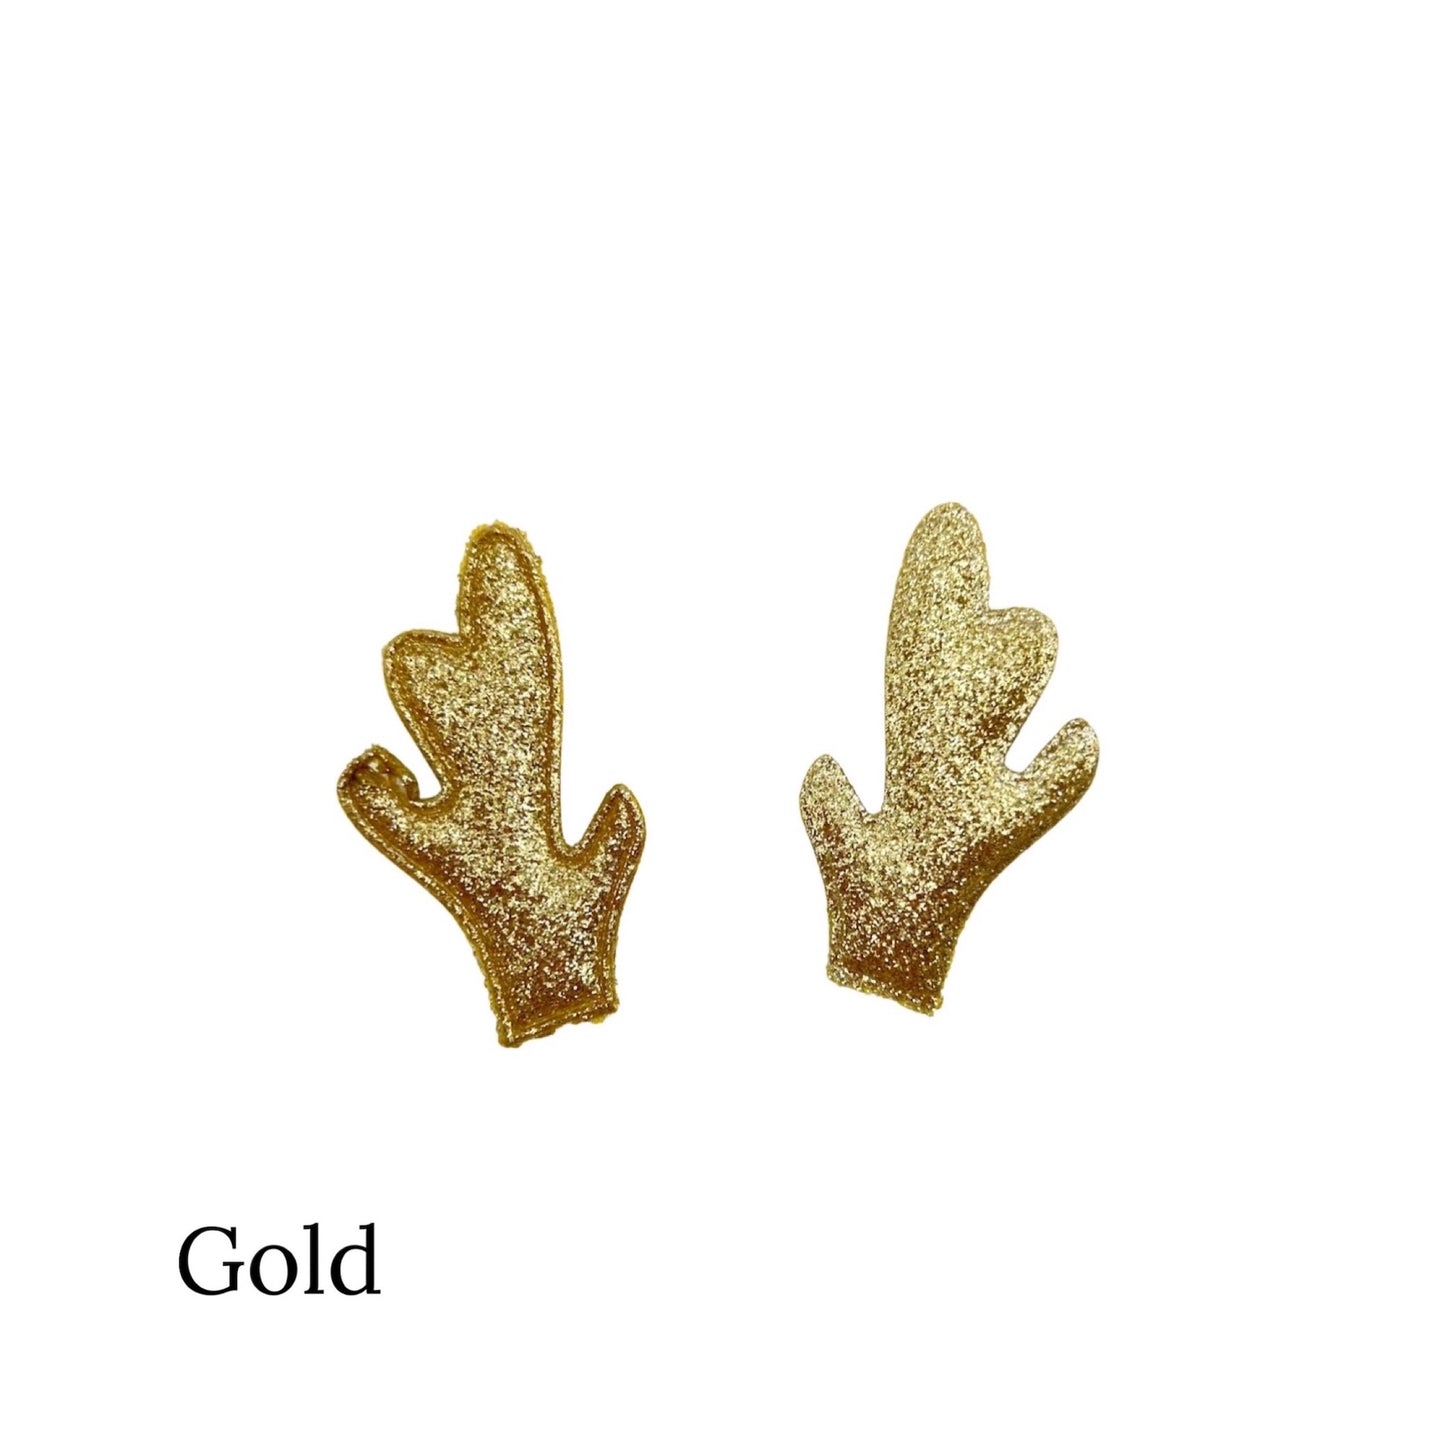 Gold antlers on a white background